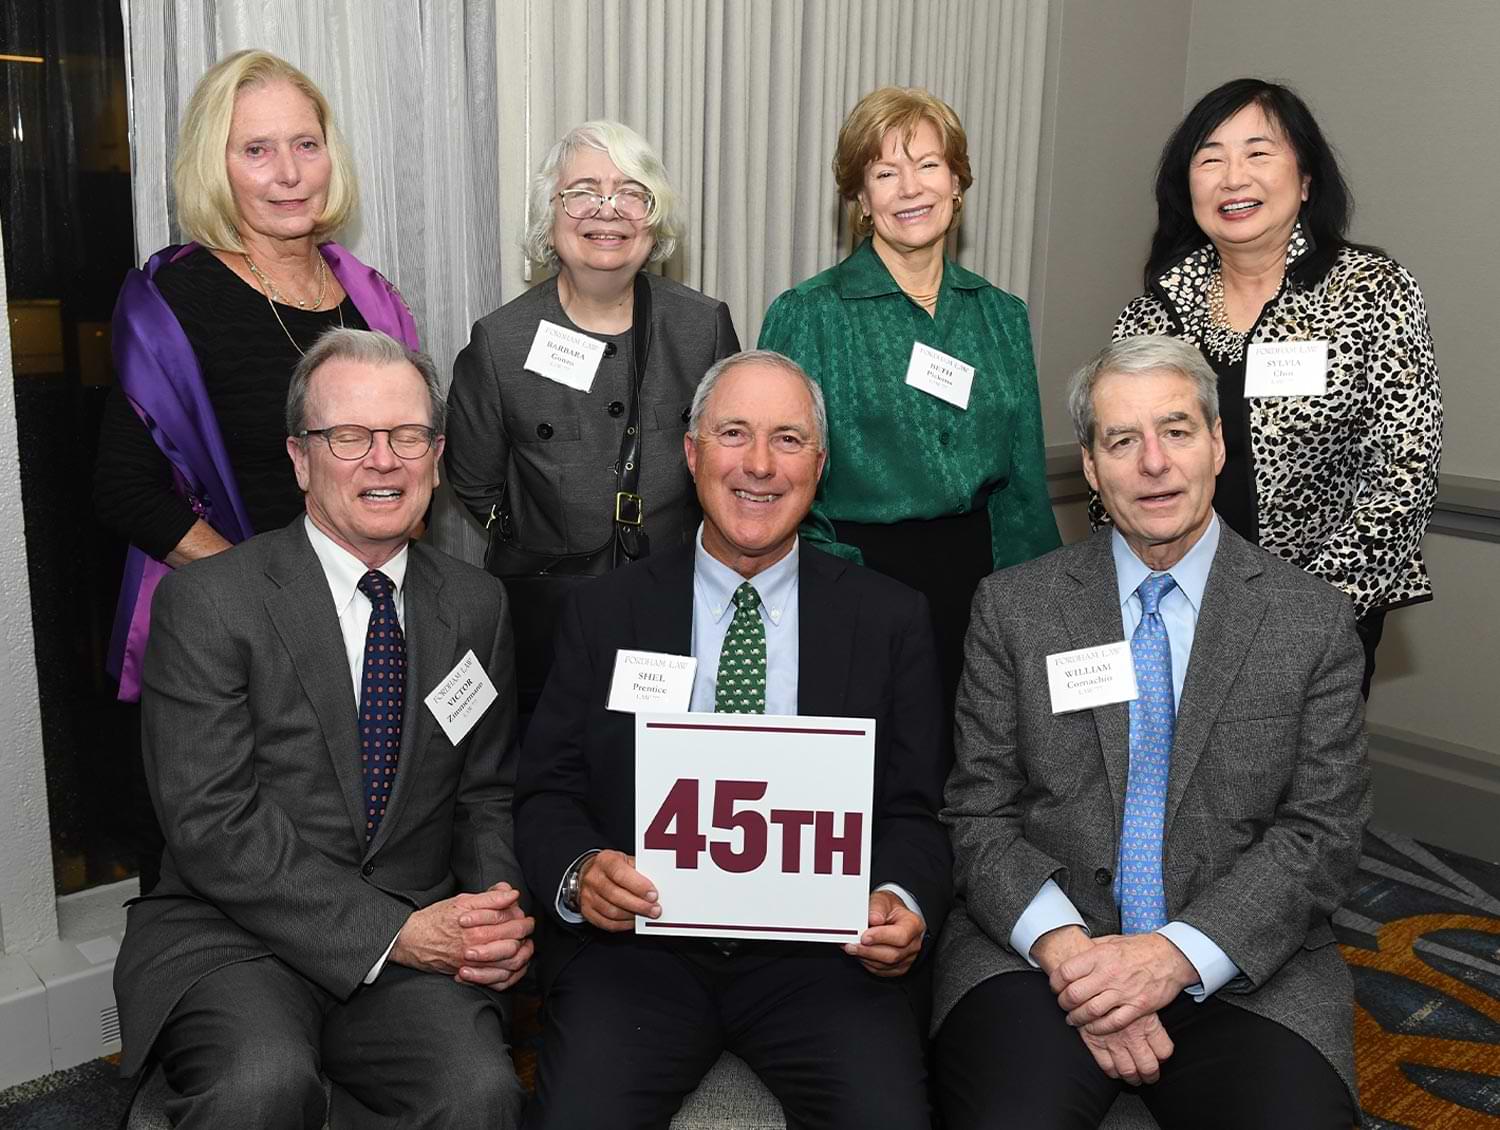 members of an alumni class celebrating their 45th reunion take a group photo